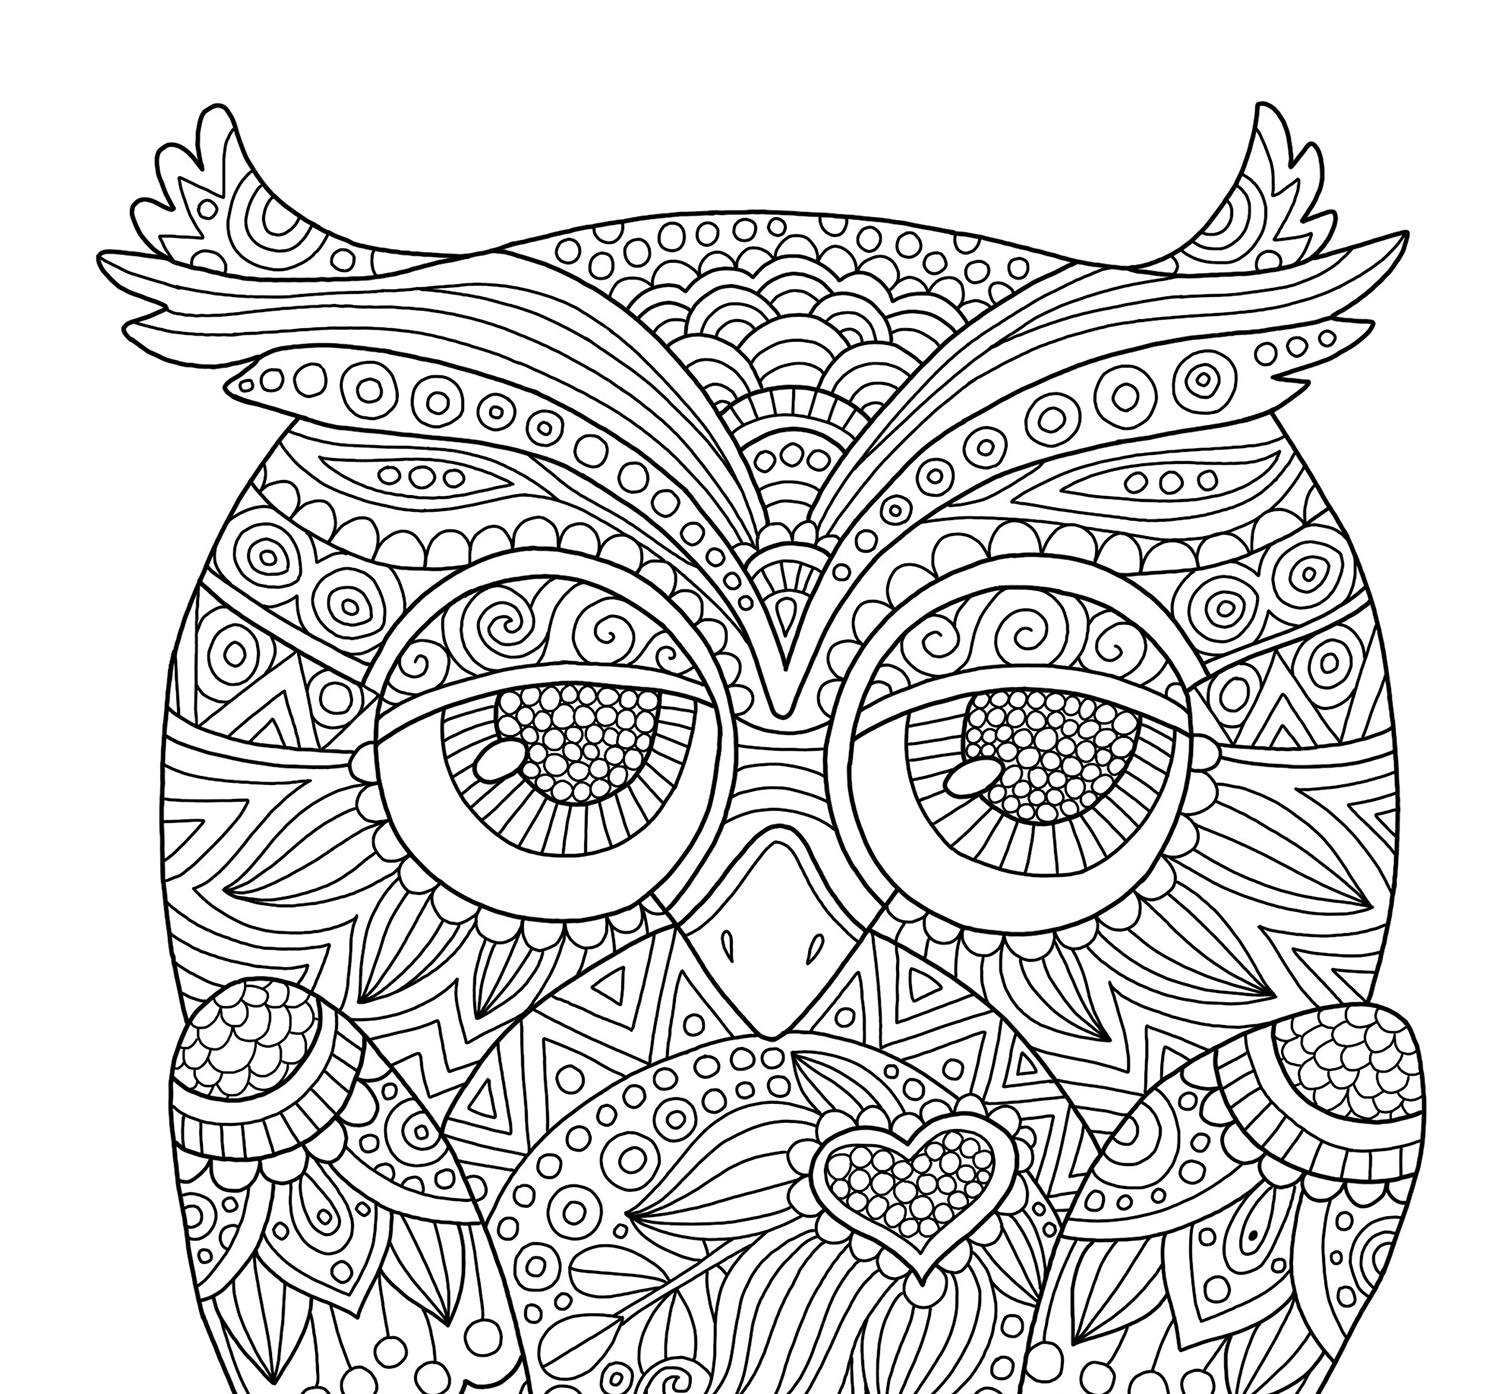 Adult coloring page cute owl doodle art diy coloring poster printable pdf instant download download now